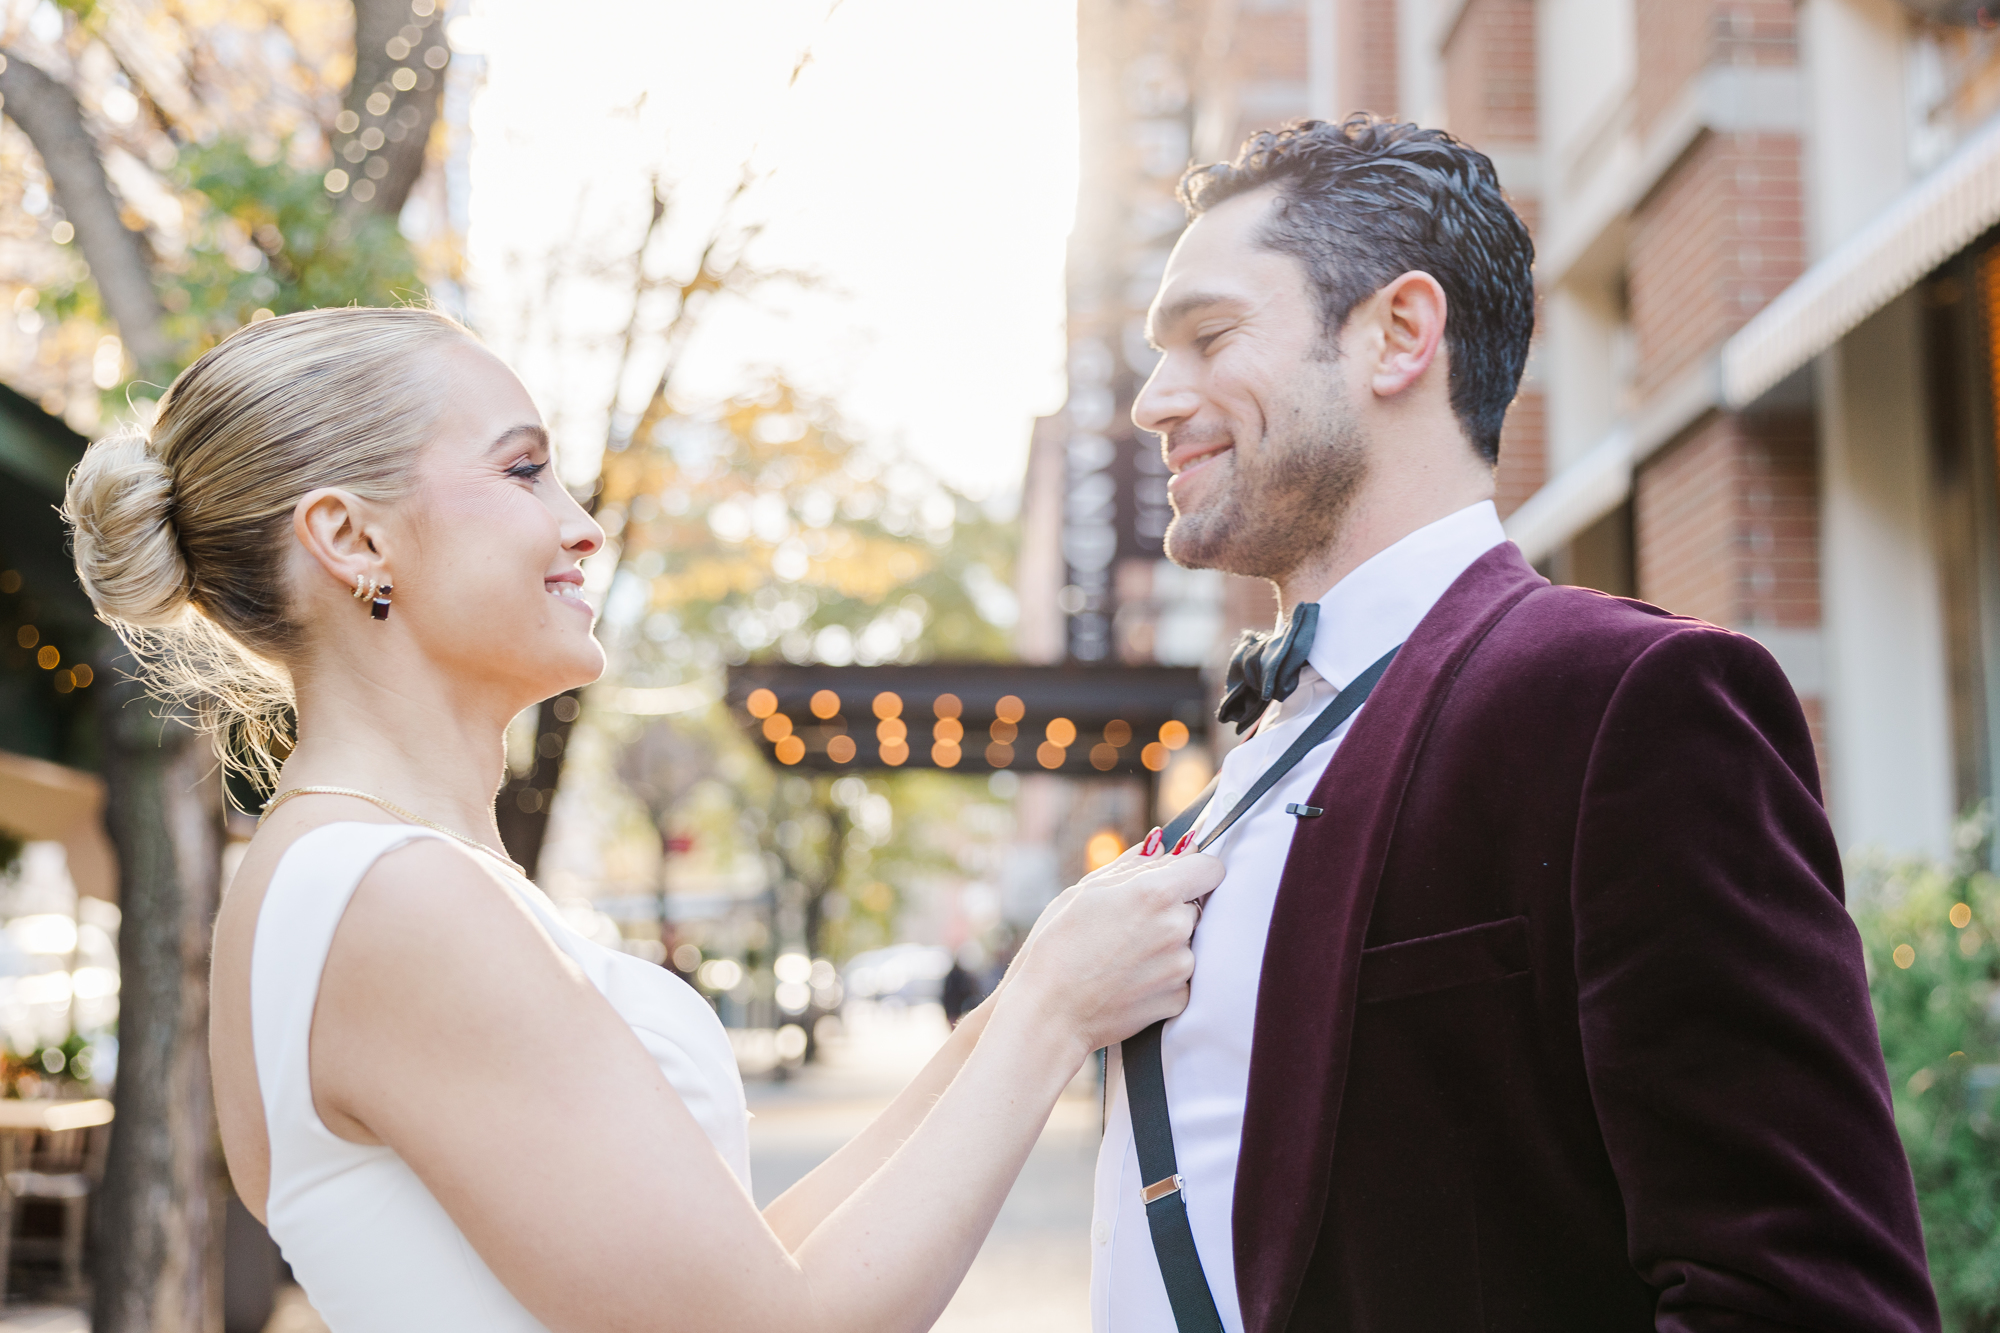 Candid New York Wedding Photography at City Winery